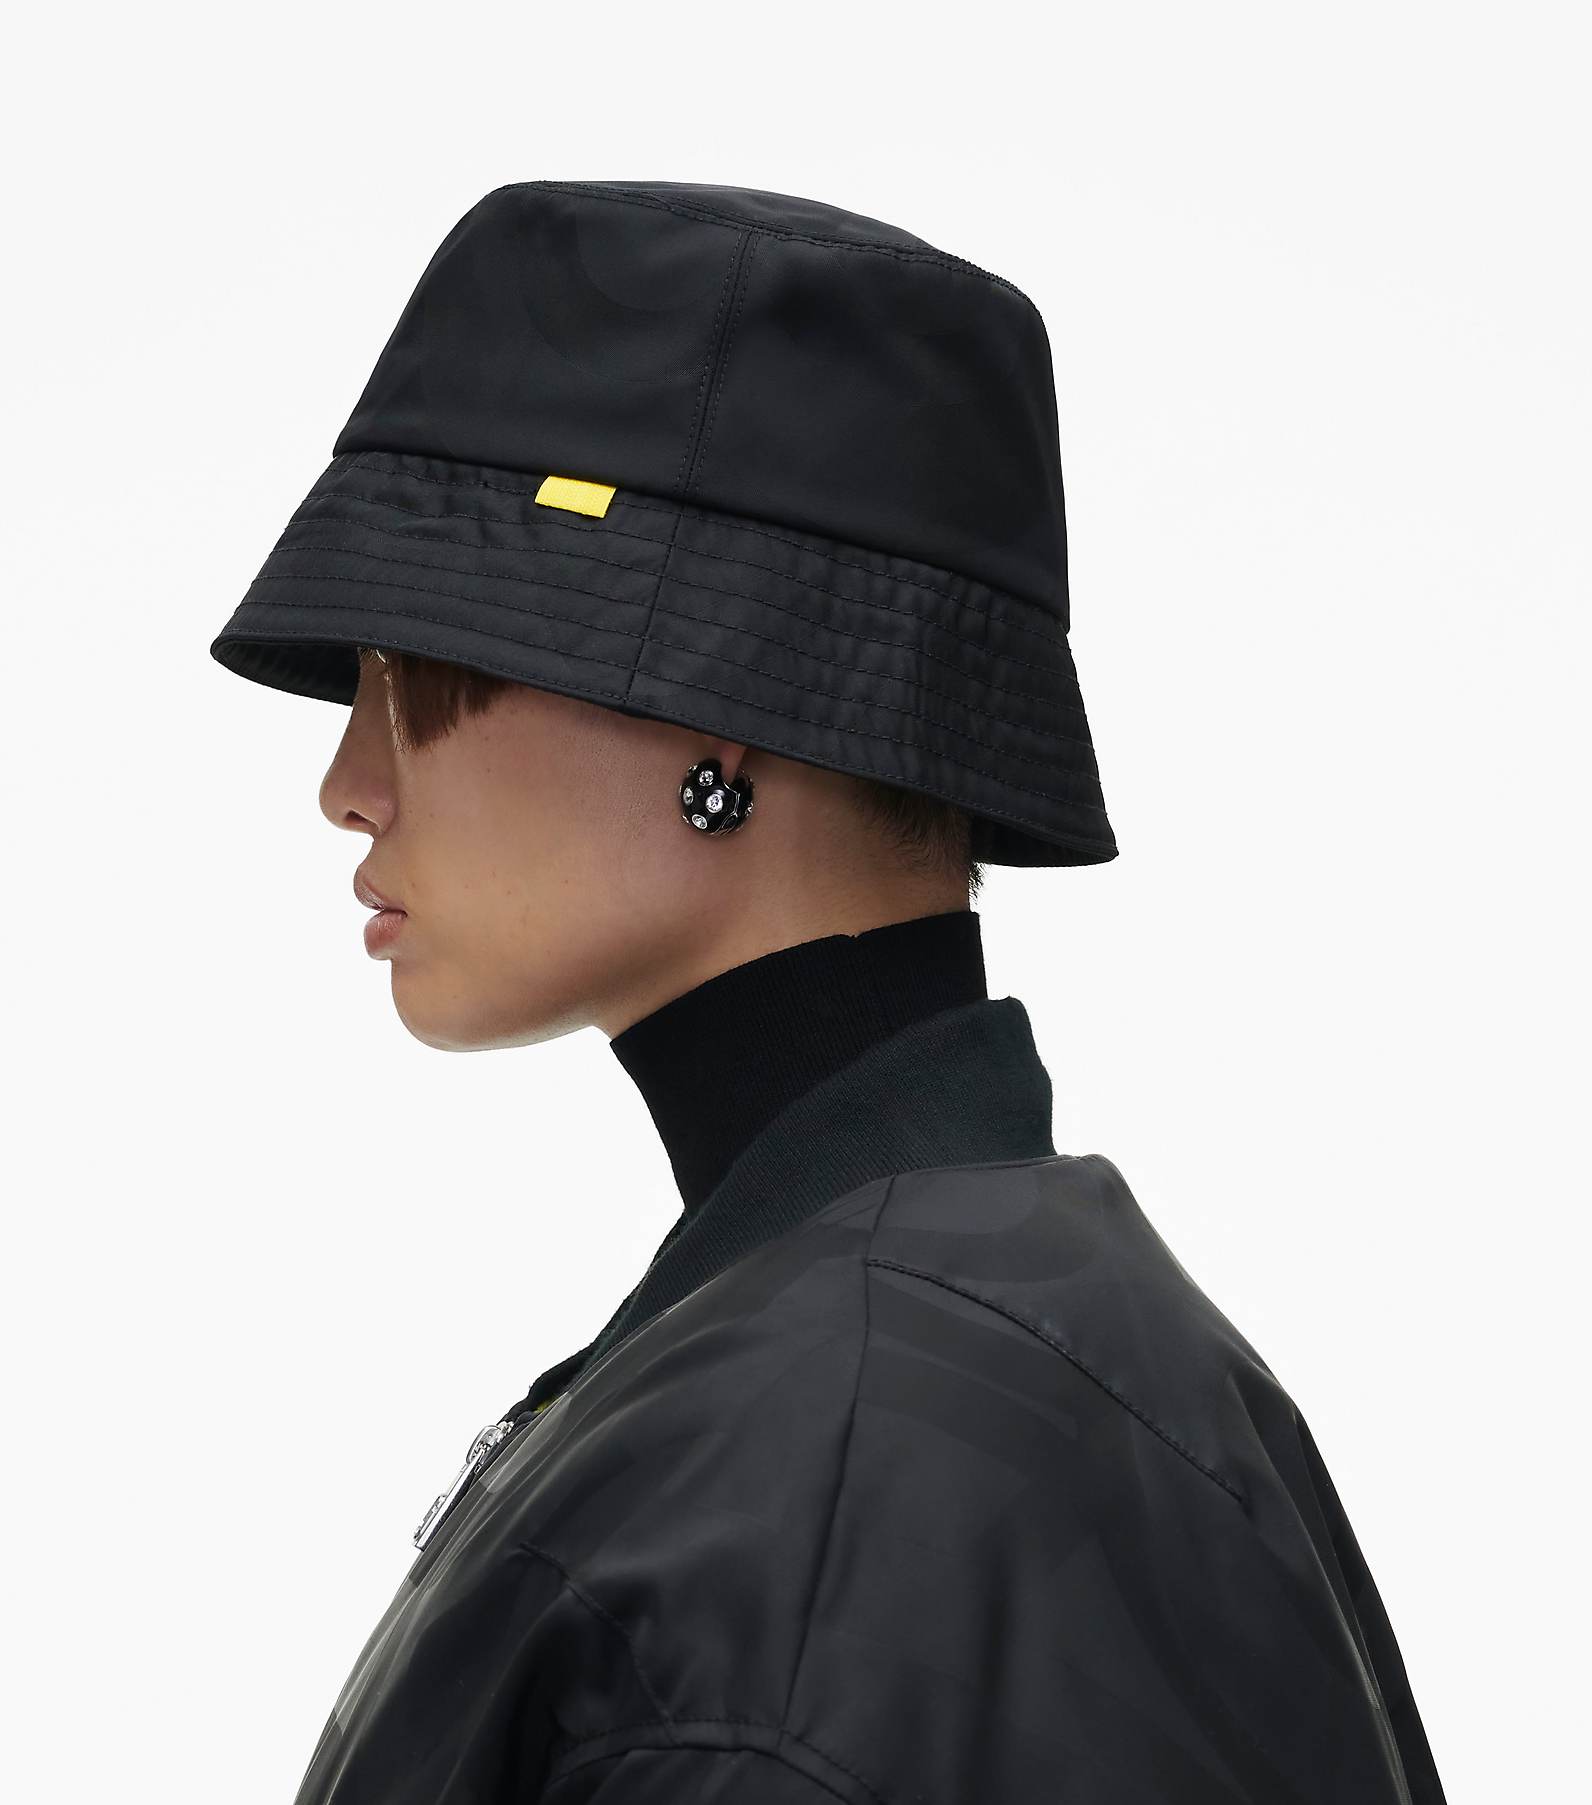 The Nylon Bucket Hat in Black, Size XS/Small